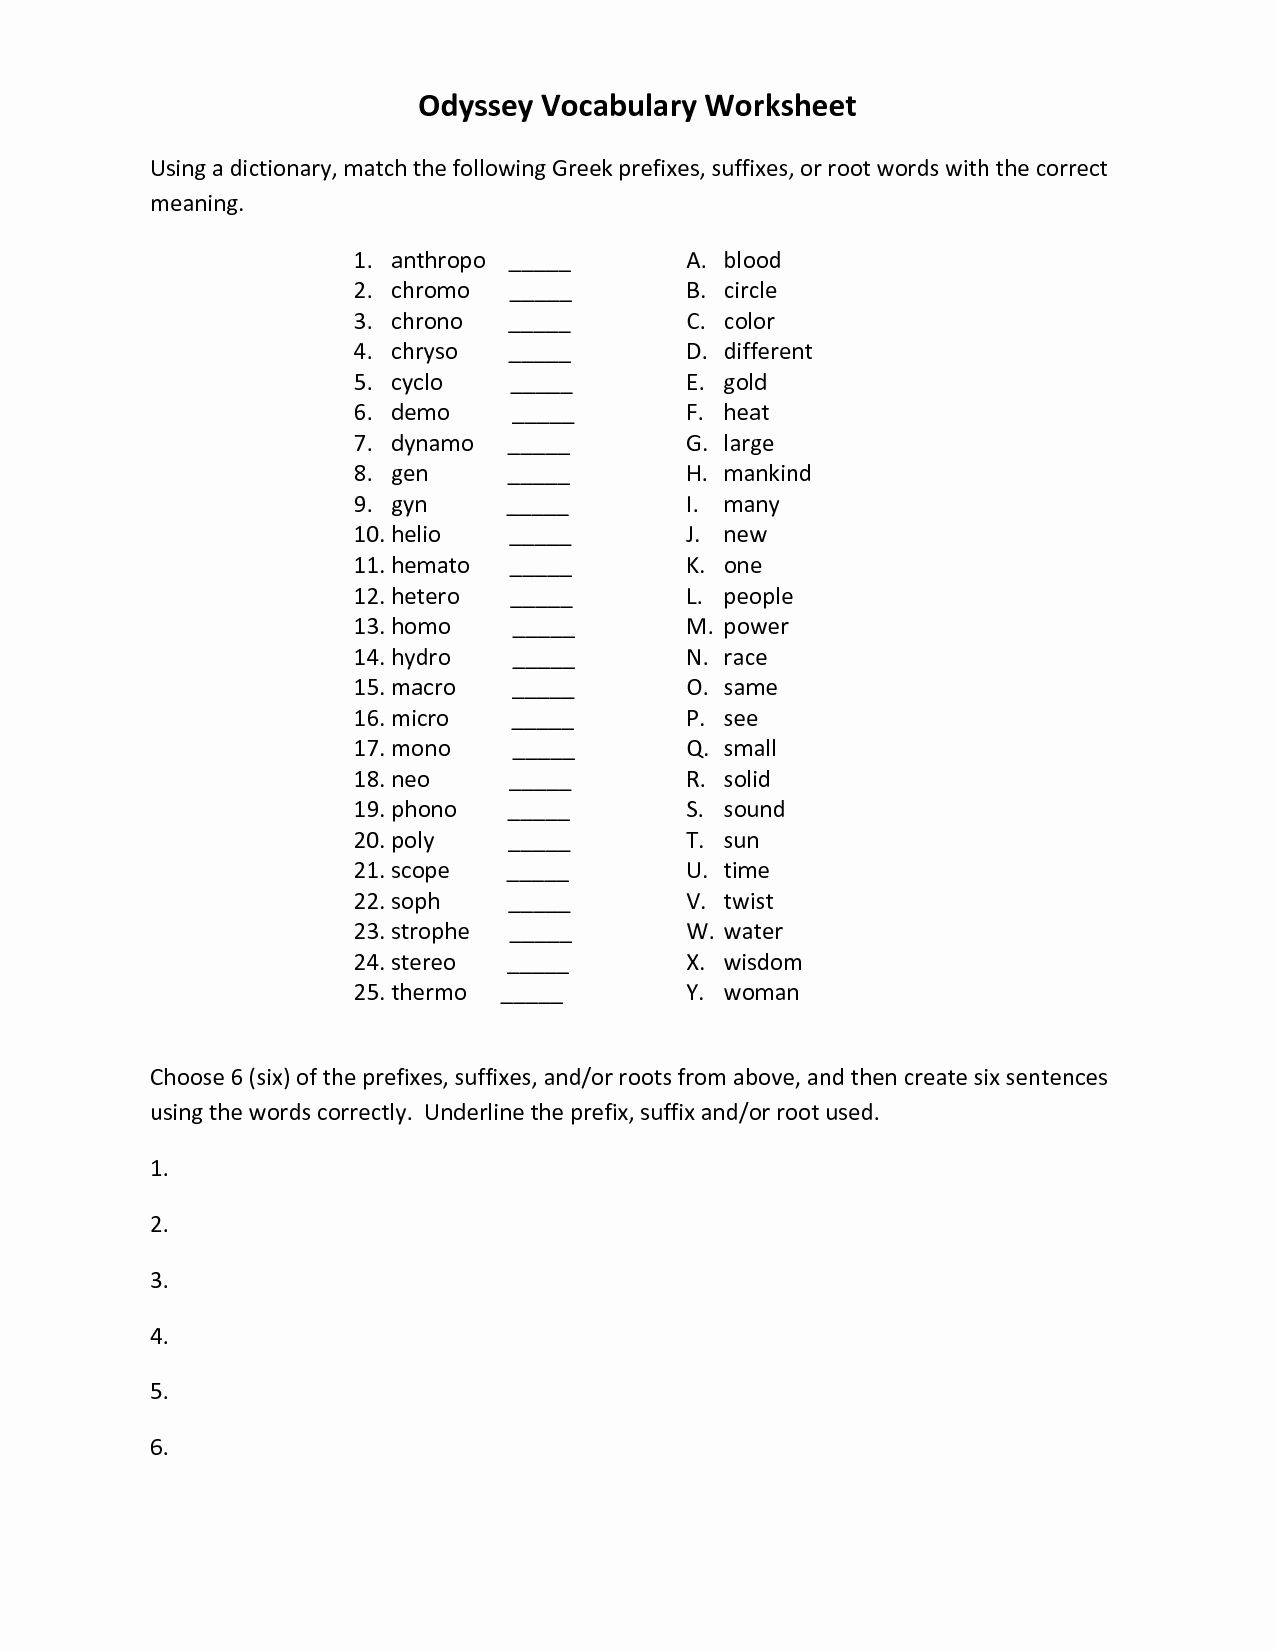 Greek and Latin Roots Worksheet Lovely 50 Greek and Latin Roots Worksheet Greek and Latin Roots